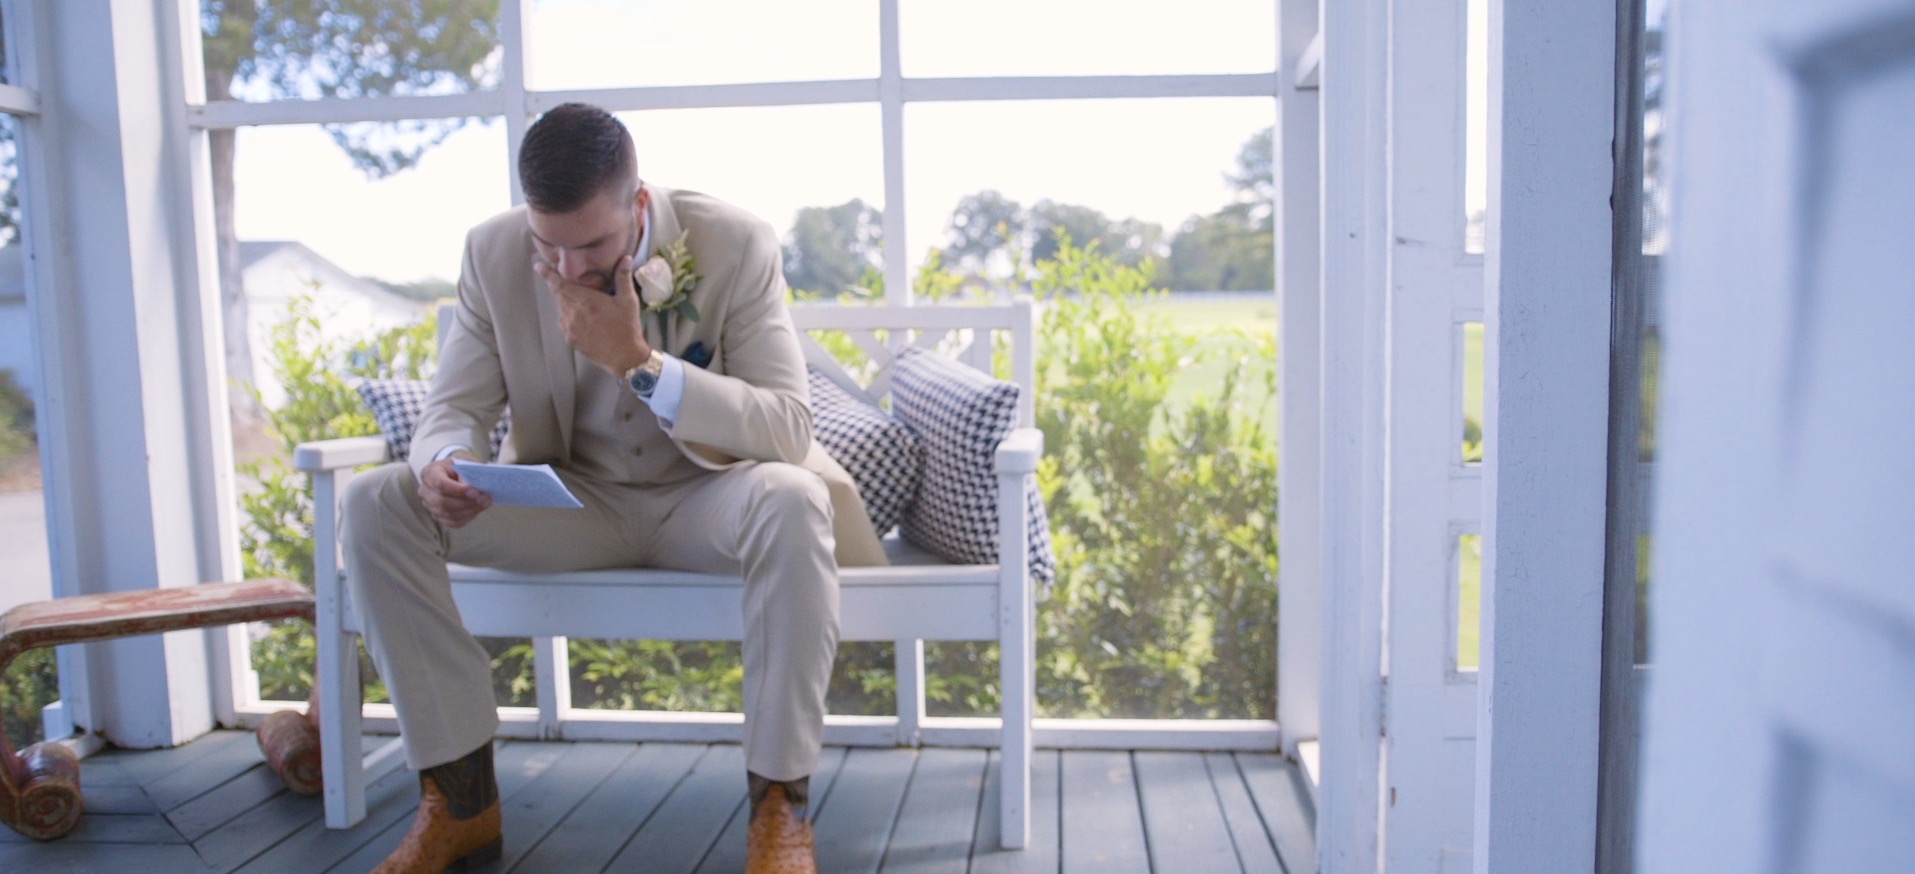 Groom reading letter from bride before marriage hire a wedding videographer